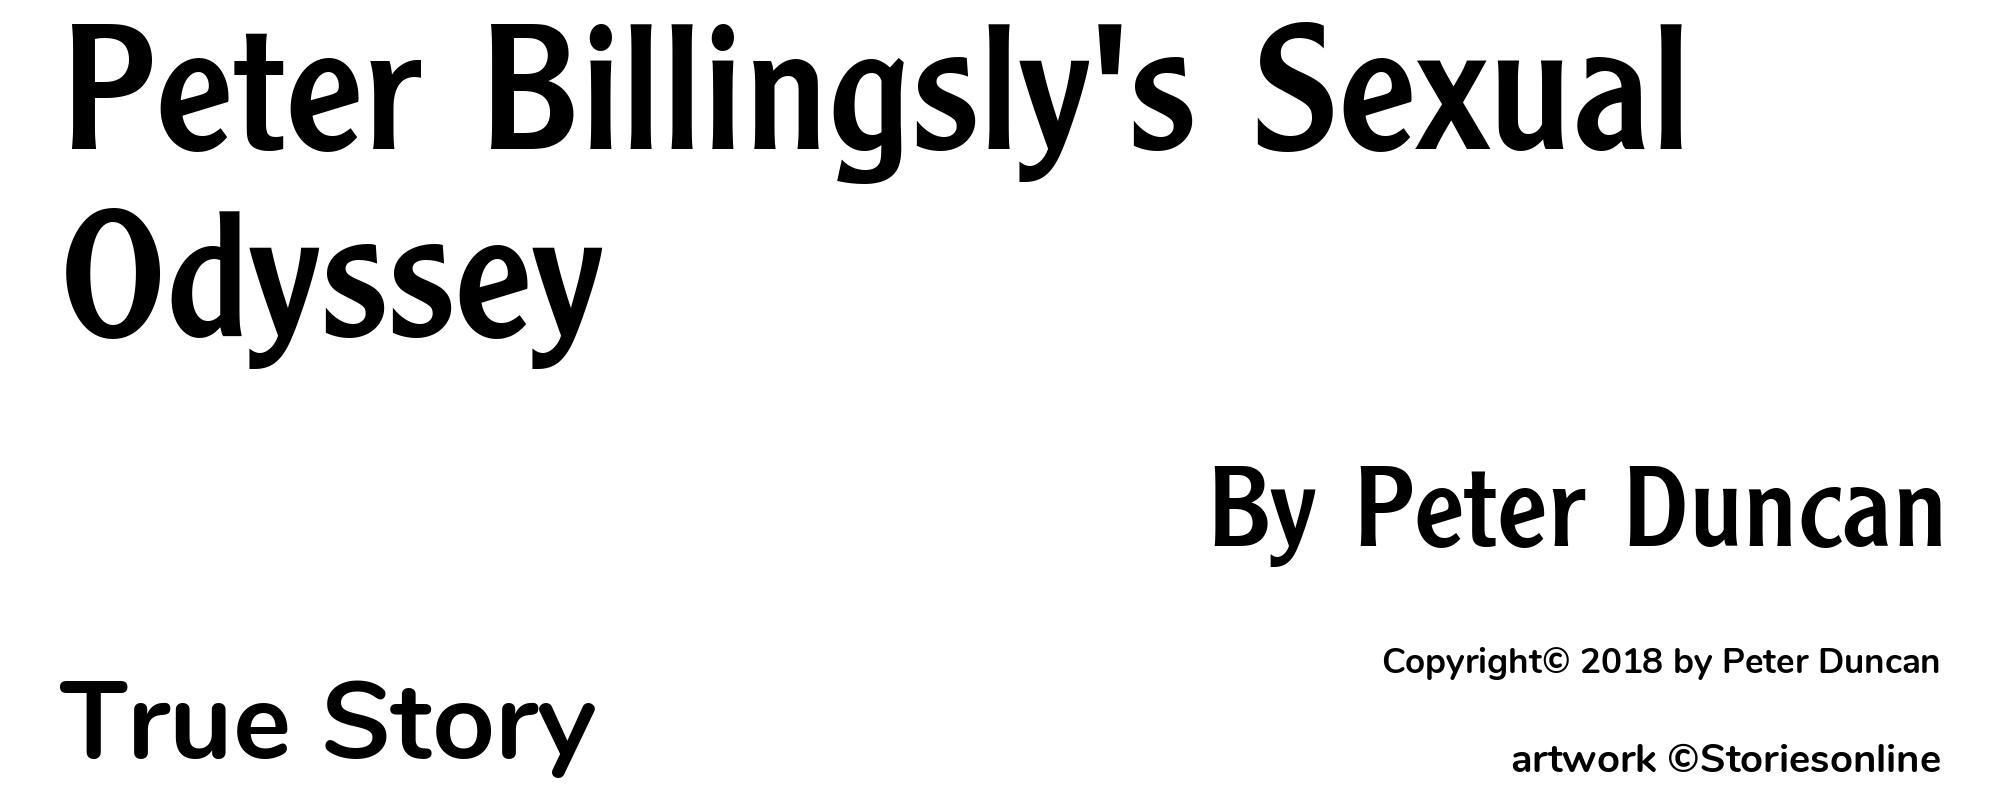 Peter Billingsly's Sexual Odyssey - Cover